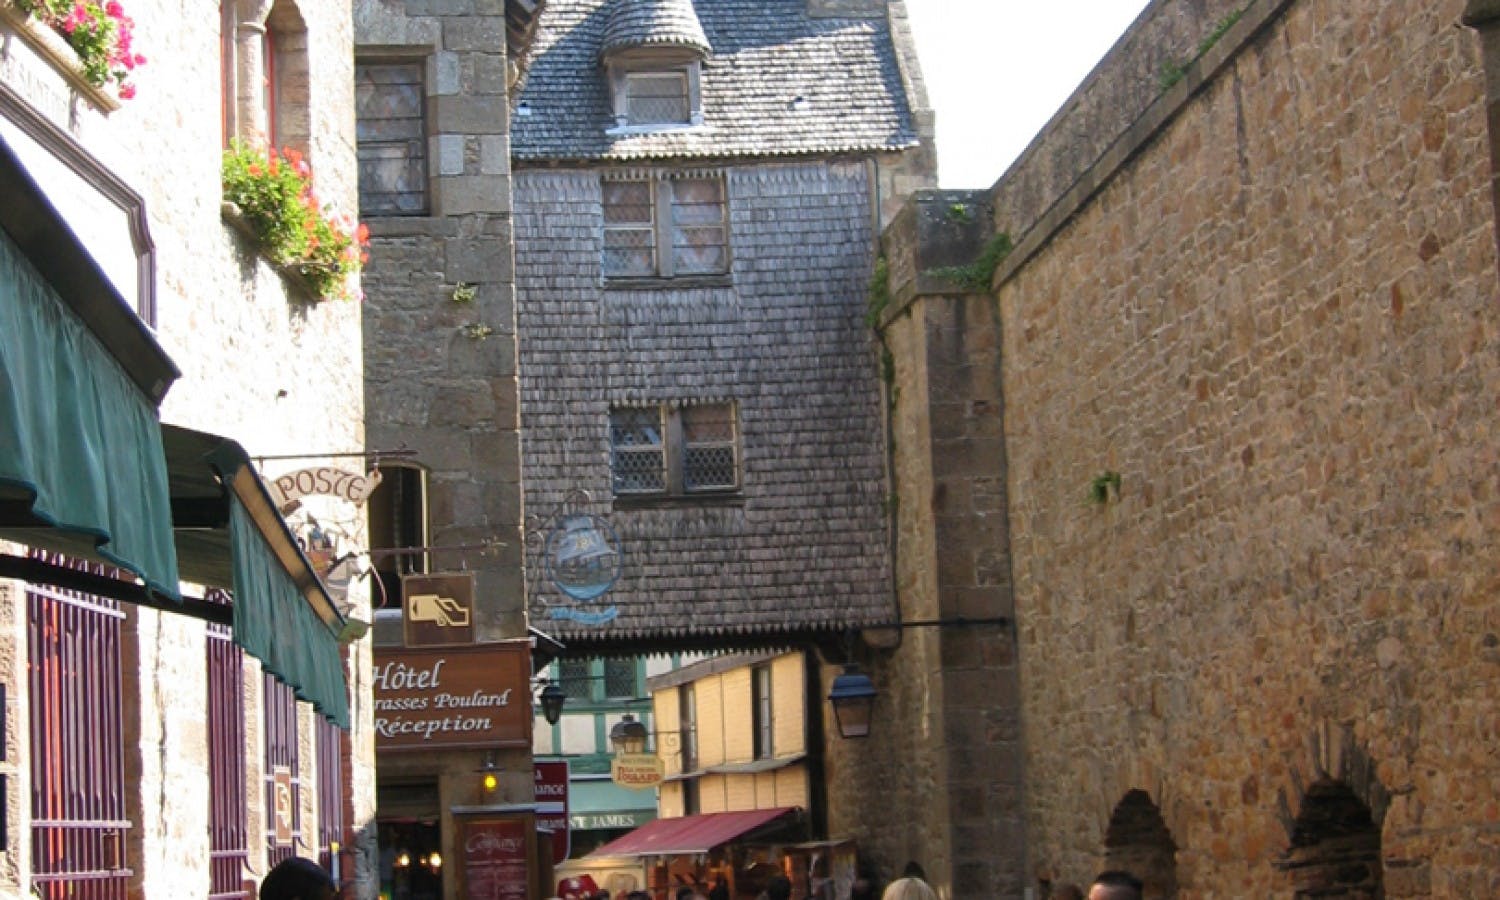 Day trip to Mont Saint Michel - Guided Visit & Lunch